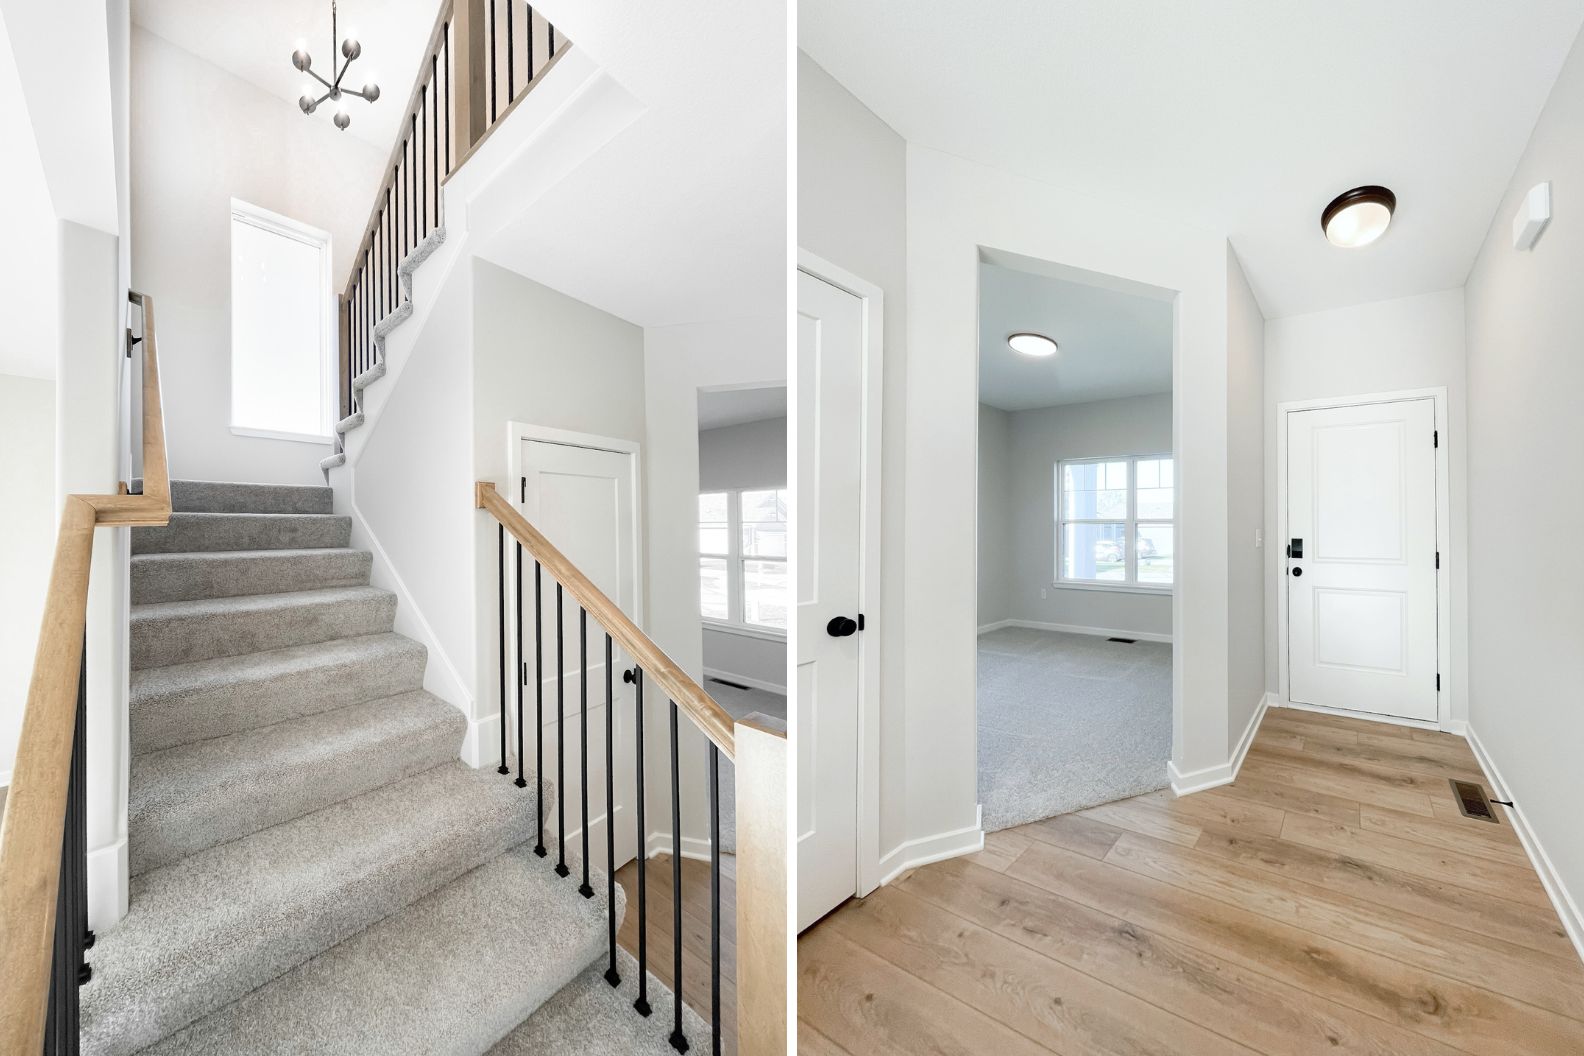 Staircase 2-Story Home For Sale In Kansas City - Hearthside Homes Of Kansas City Home Builder